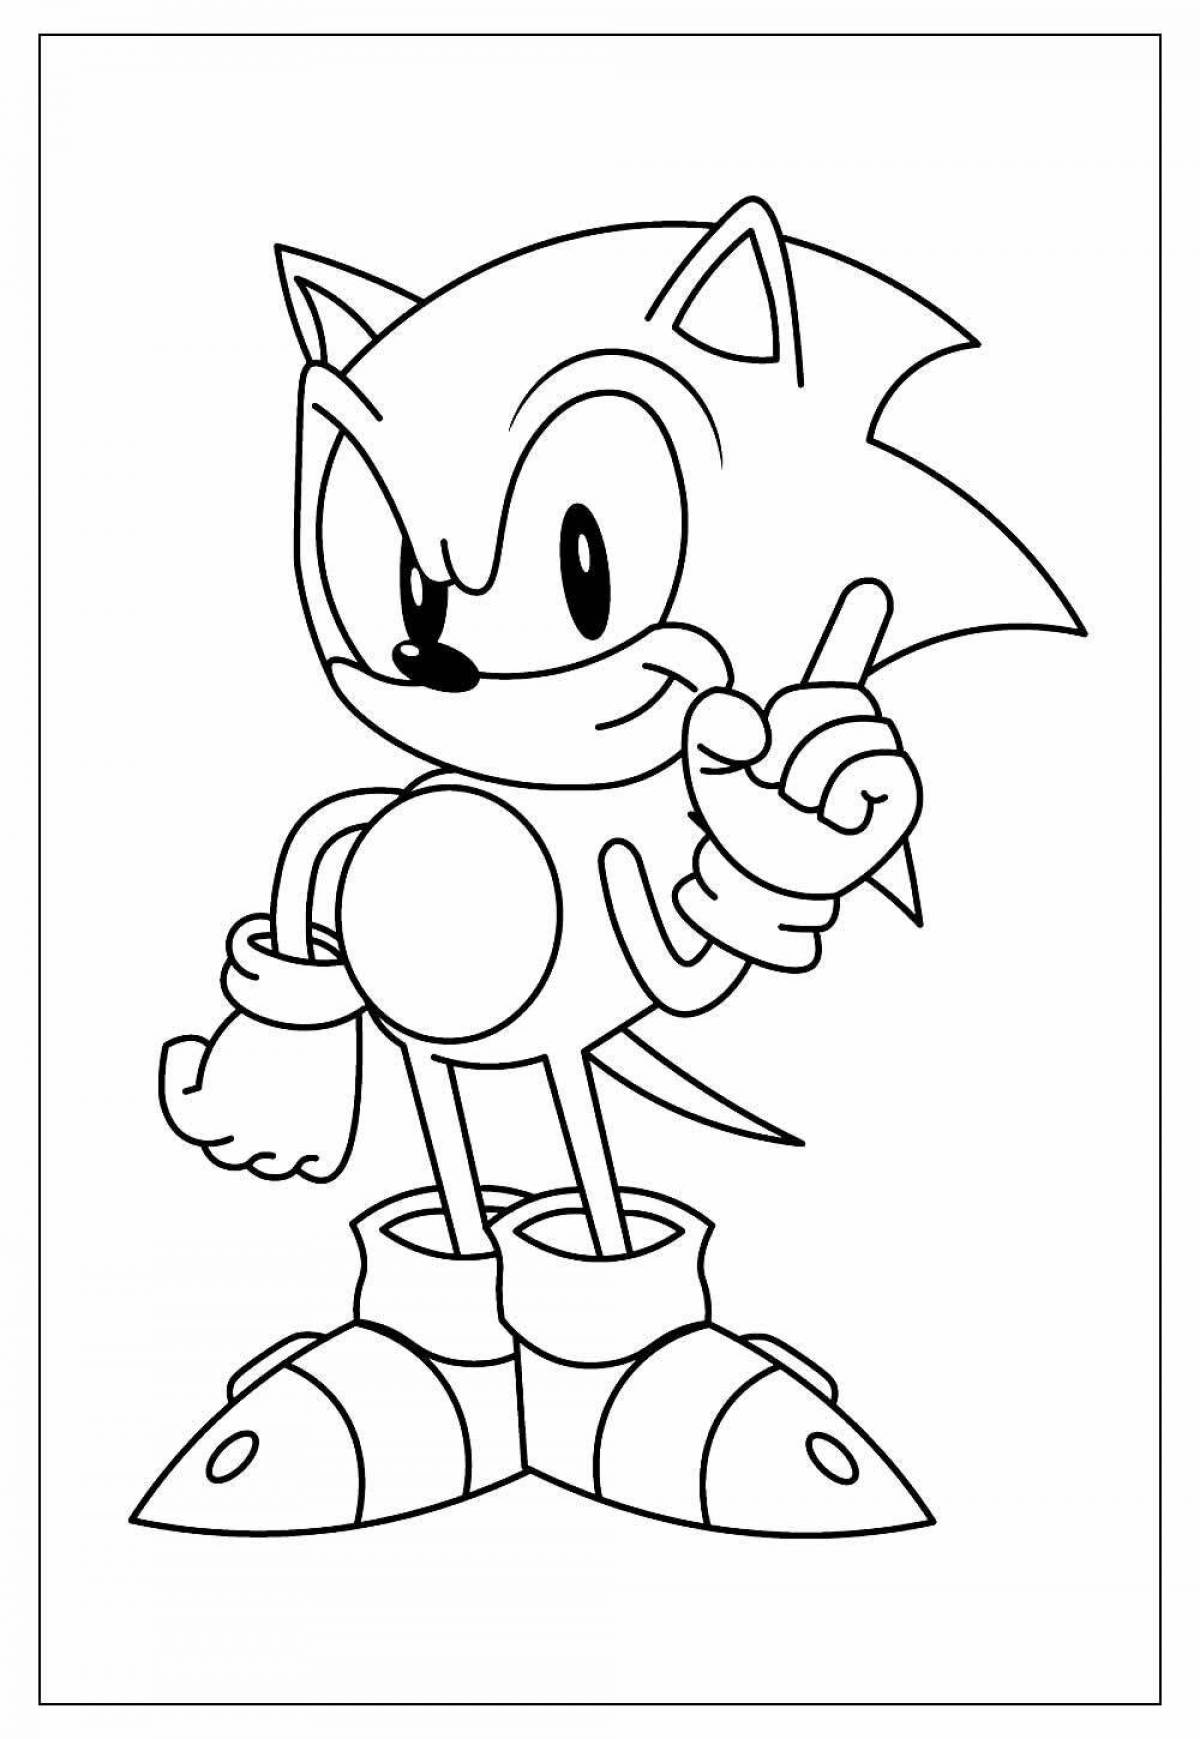 Great sonic monster coloring book